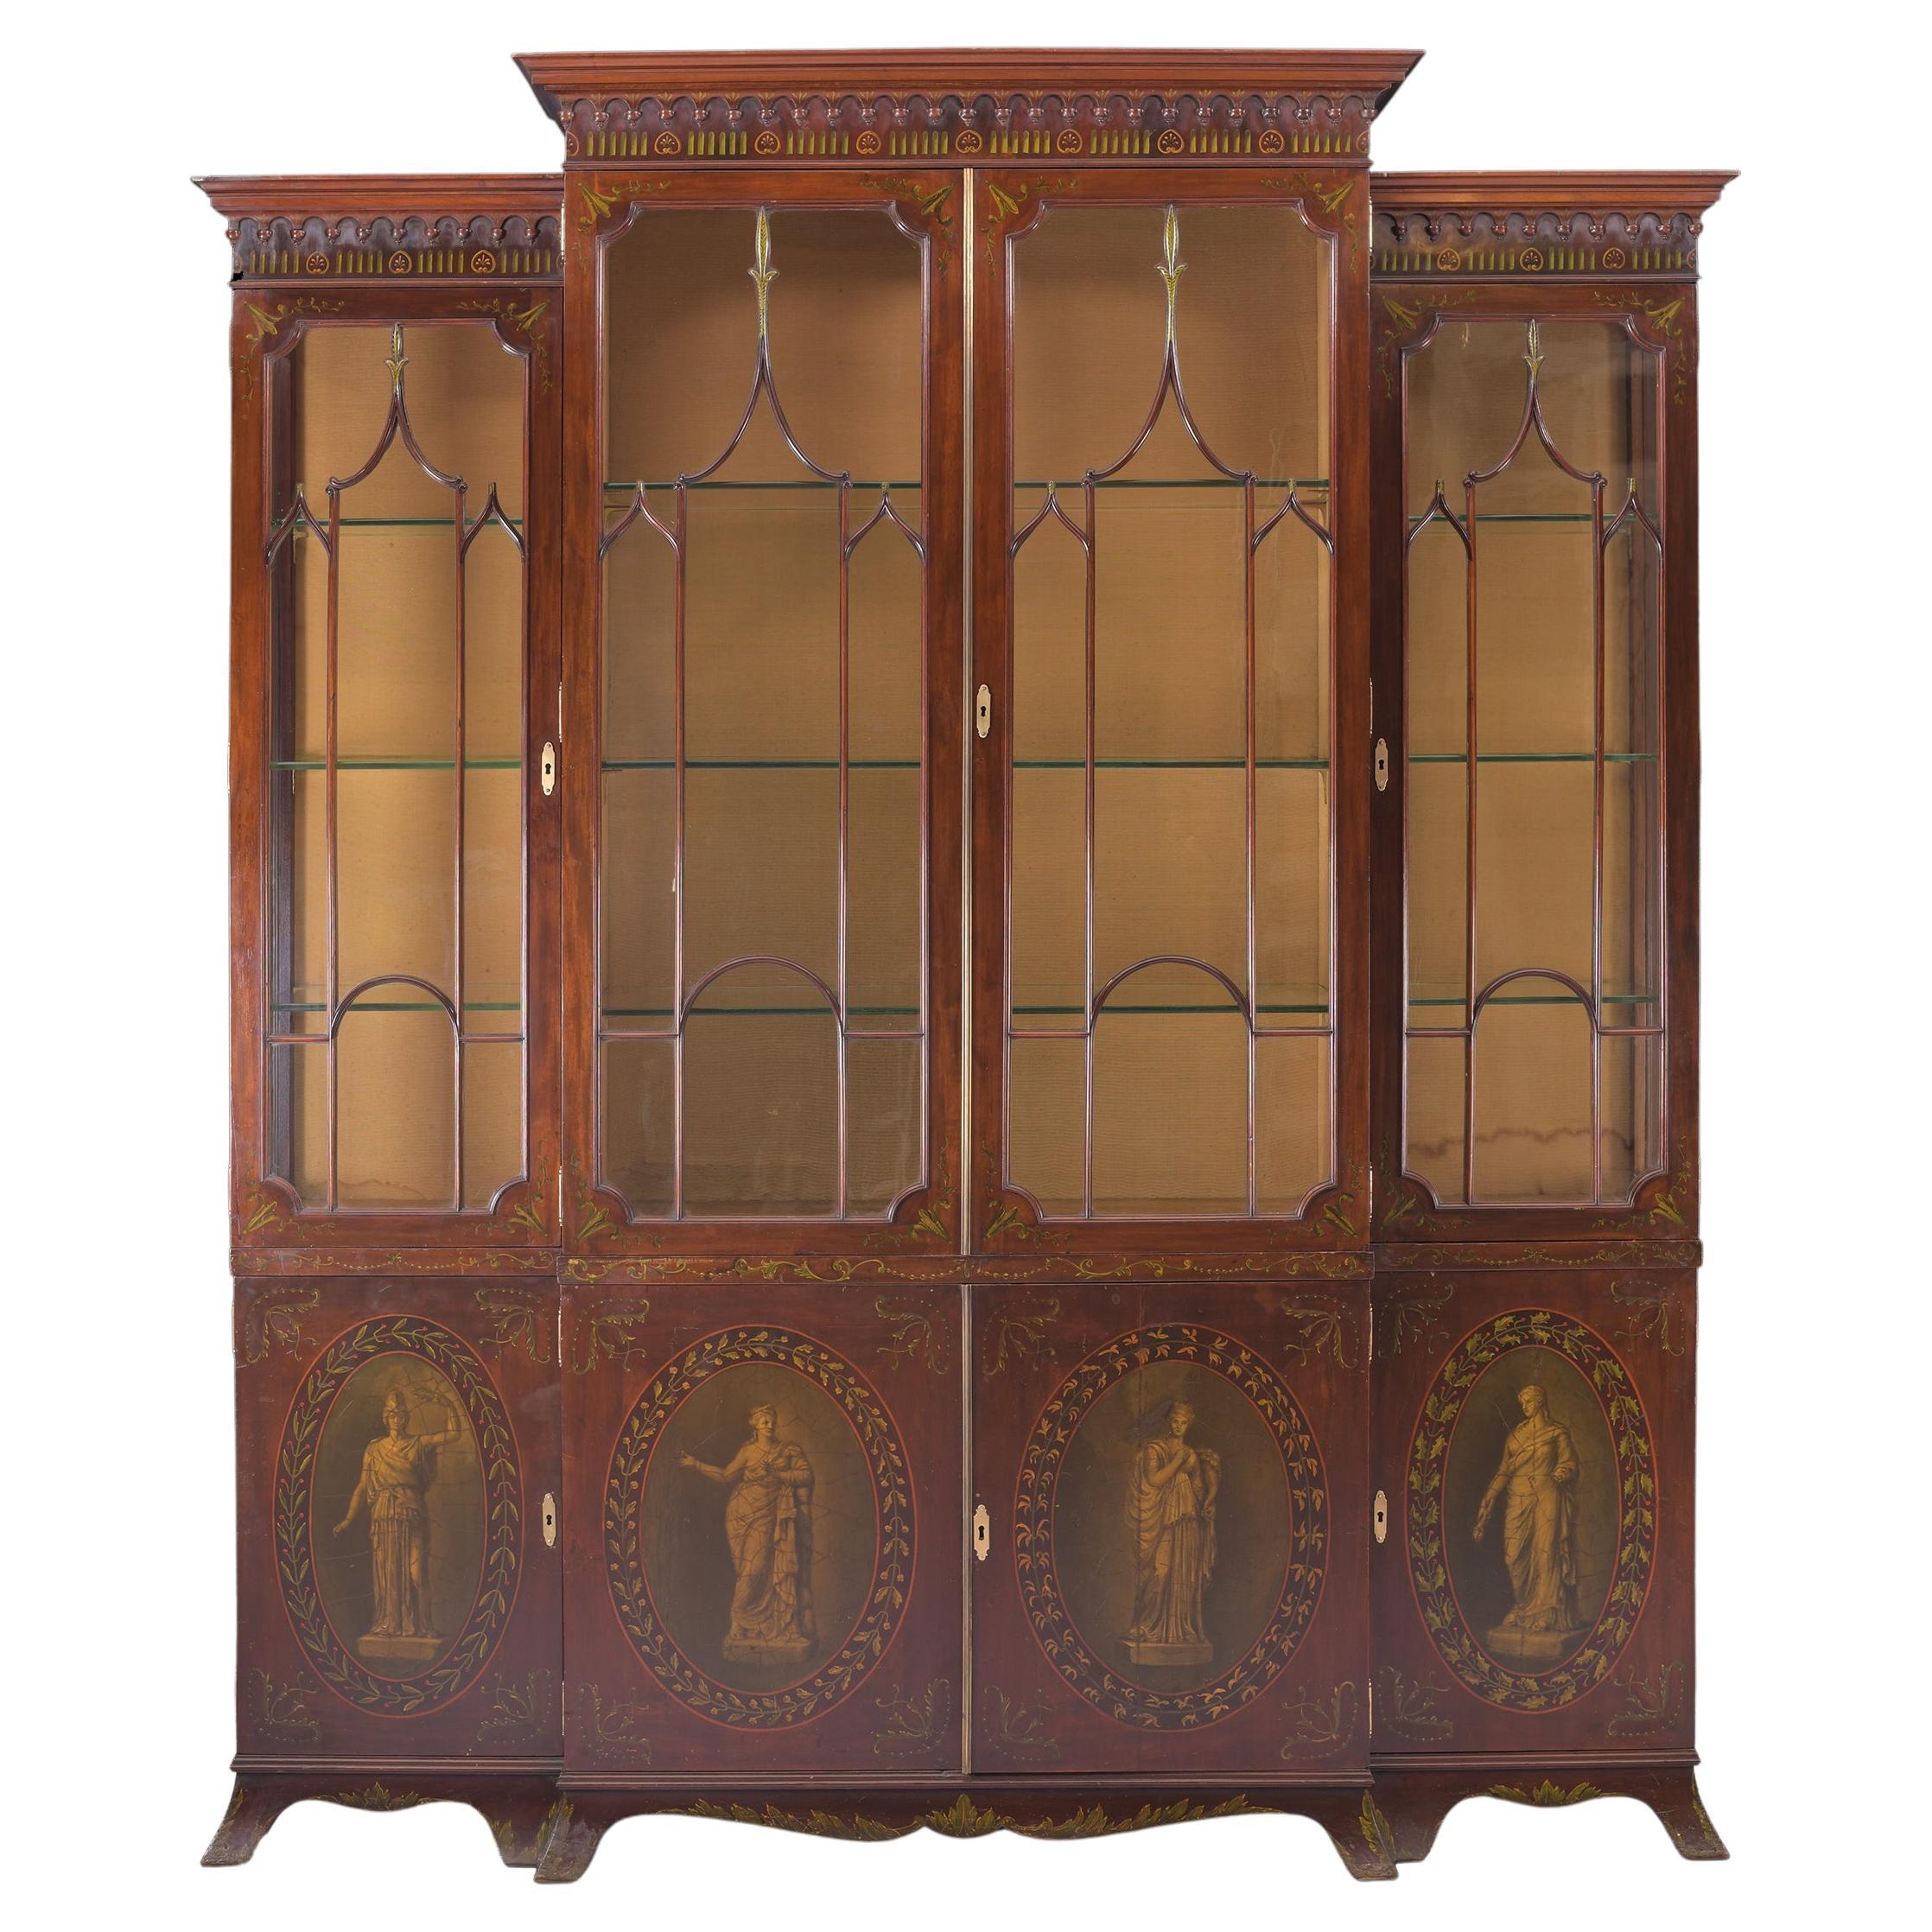 19th Century English Display Cabinet in the Neo-Classical Style